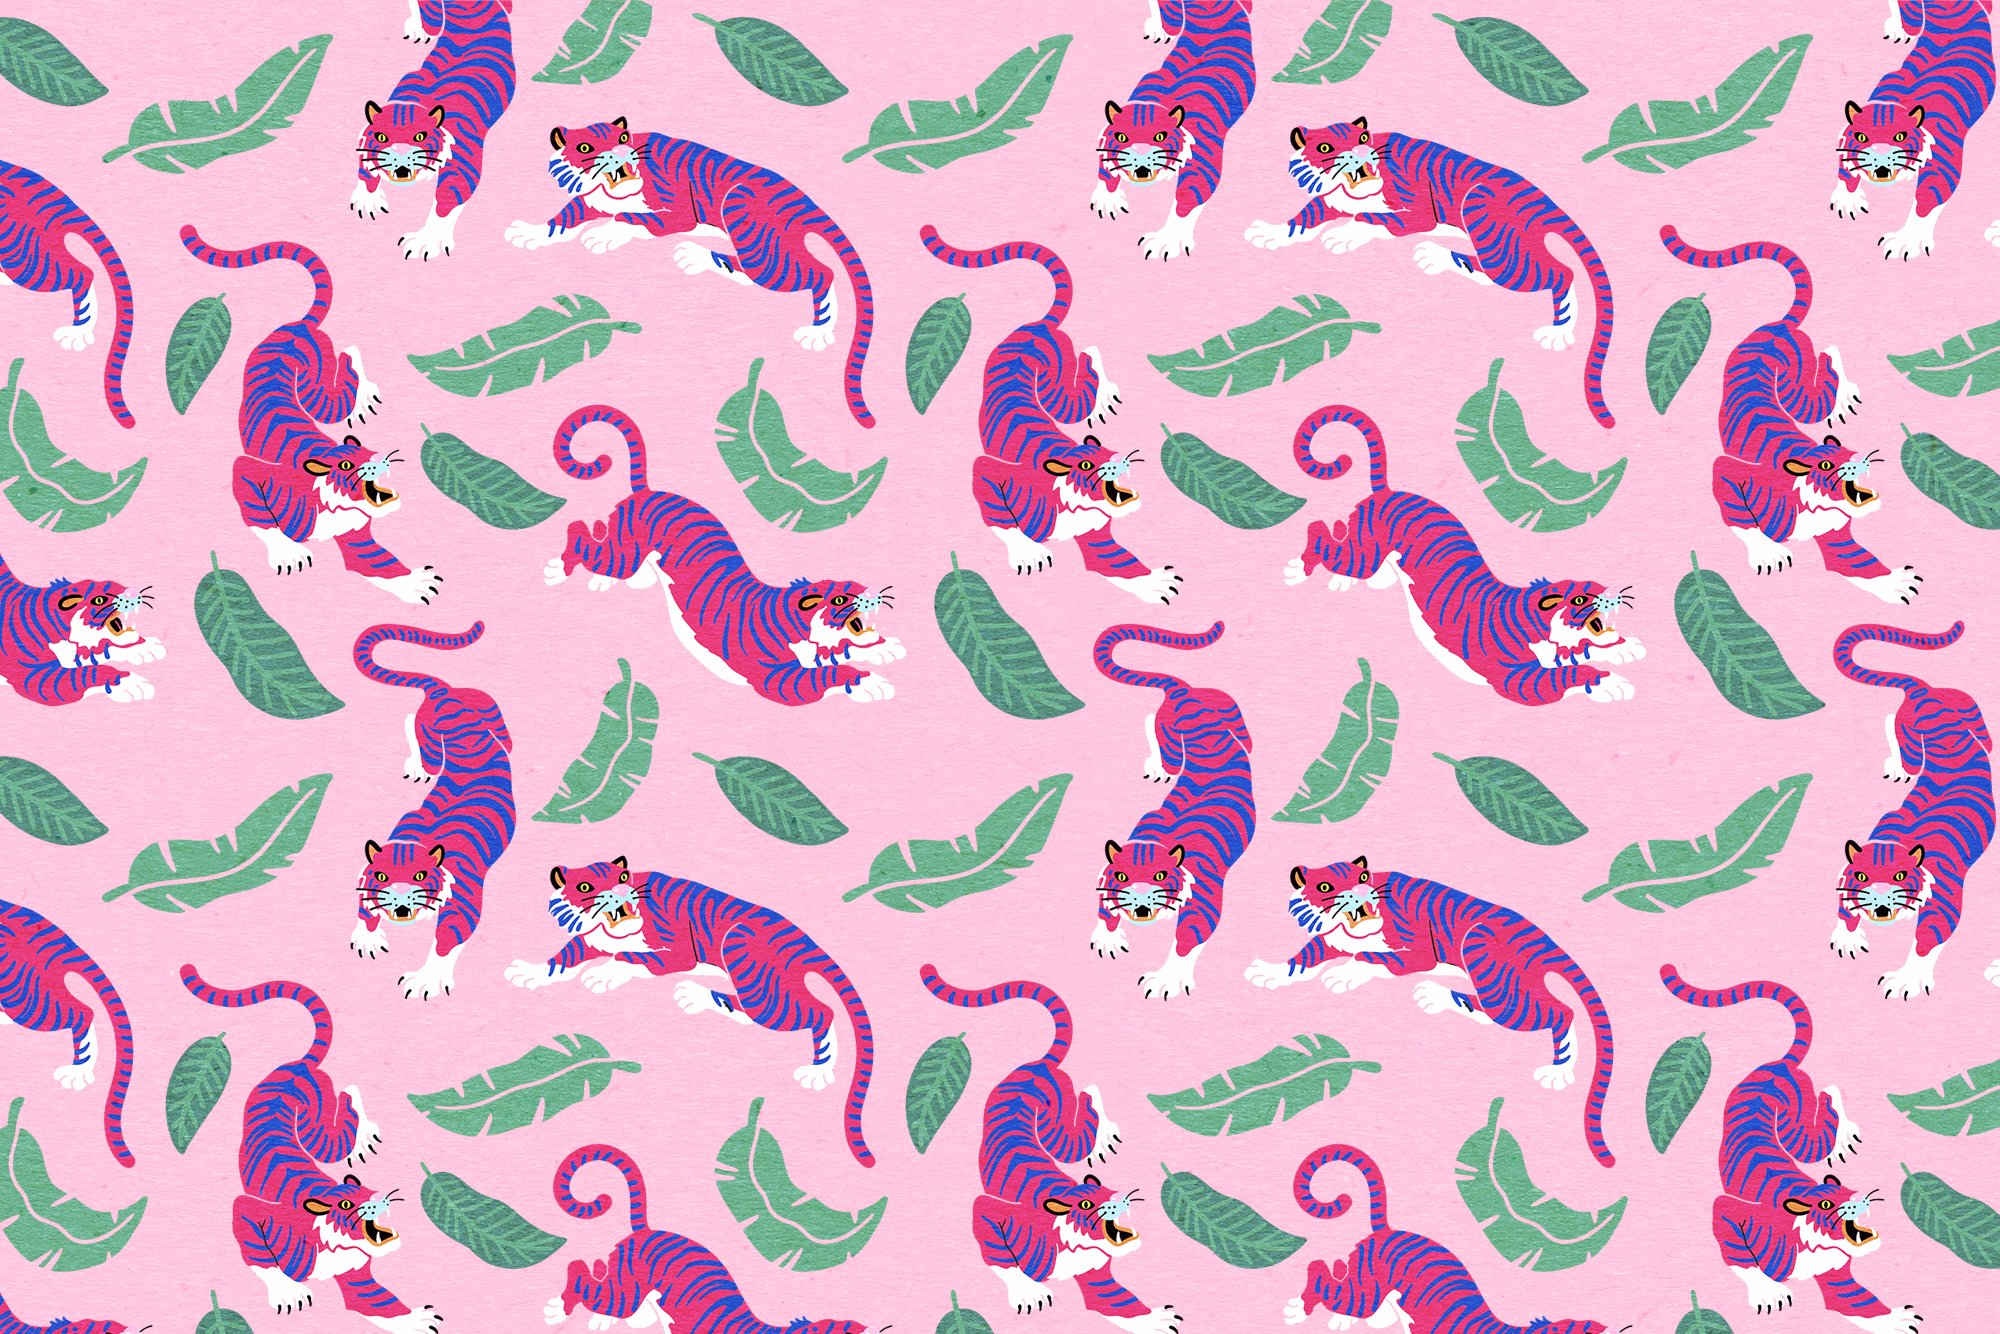  Neon Tigers Clipart and Pattern.